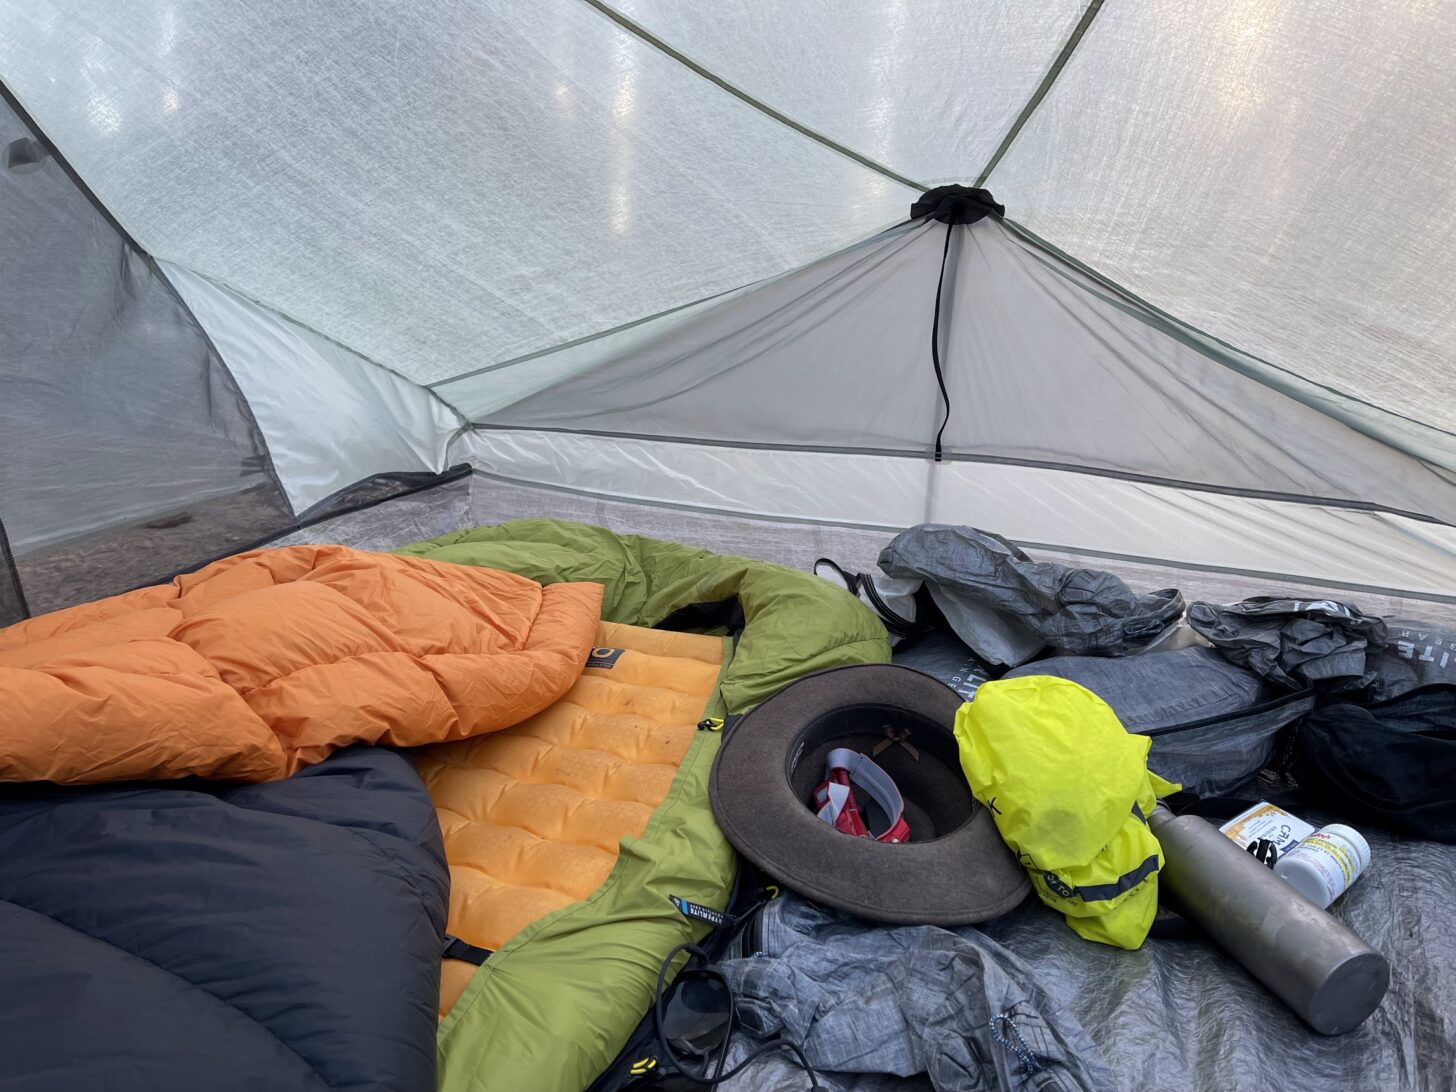 Gear scattered through the inside of a tent.